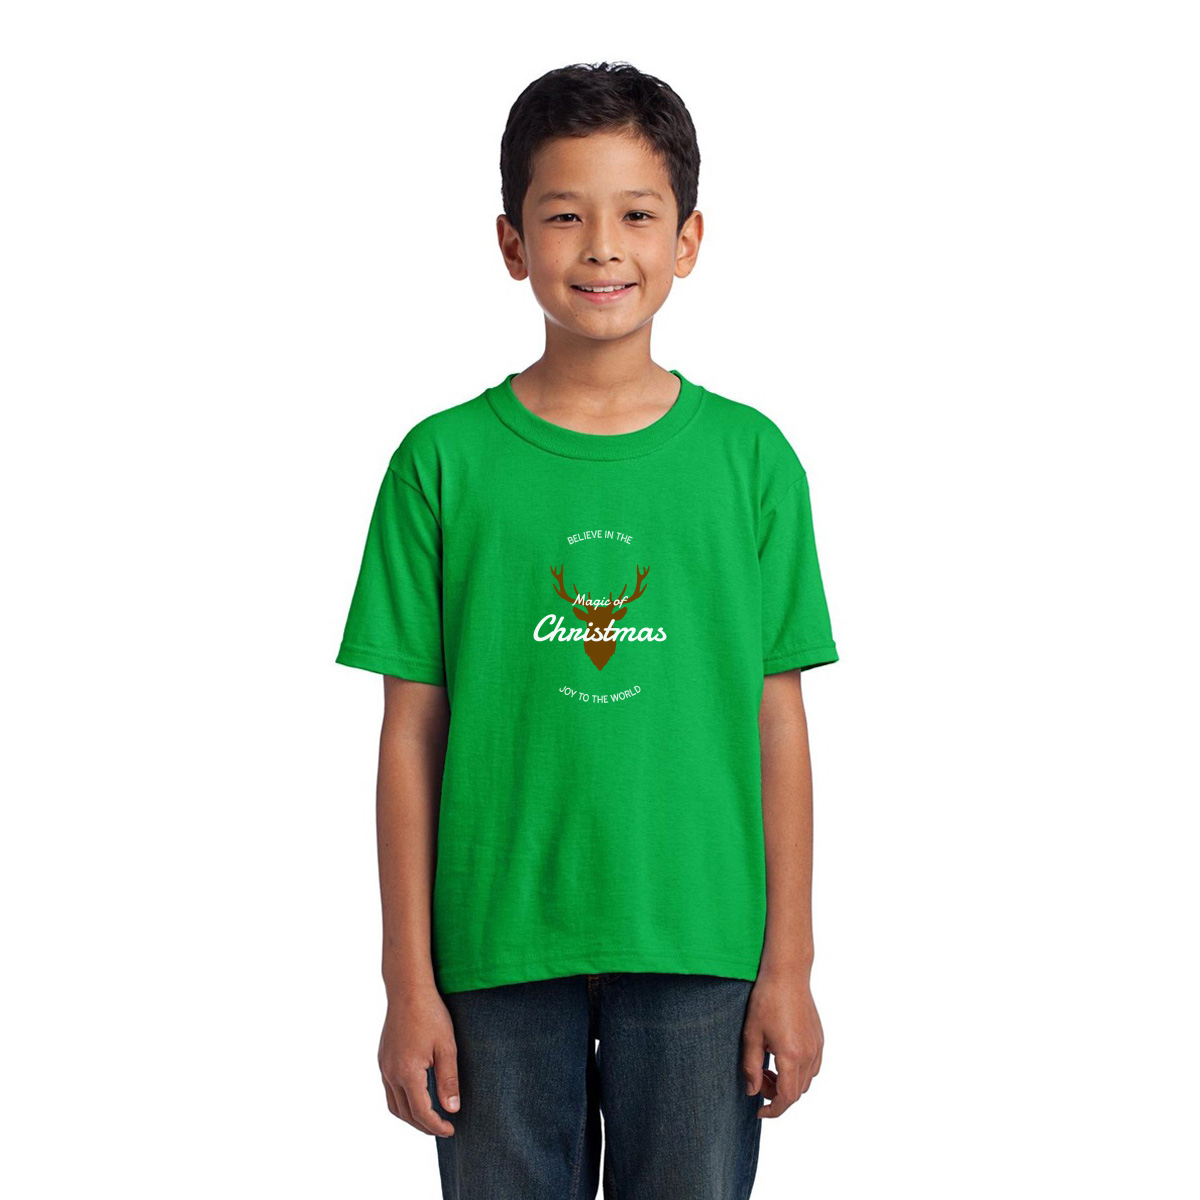 Believe in the Magic of Christmas Joy to the World Kids T-shirt | Green